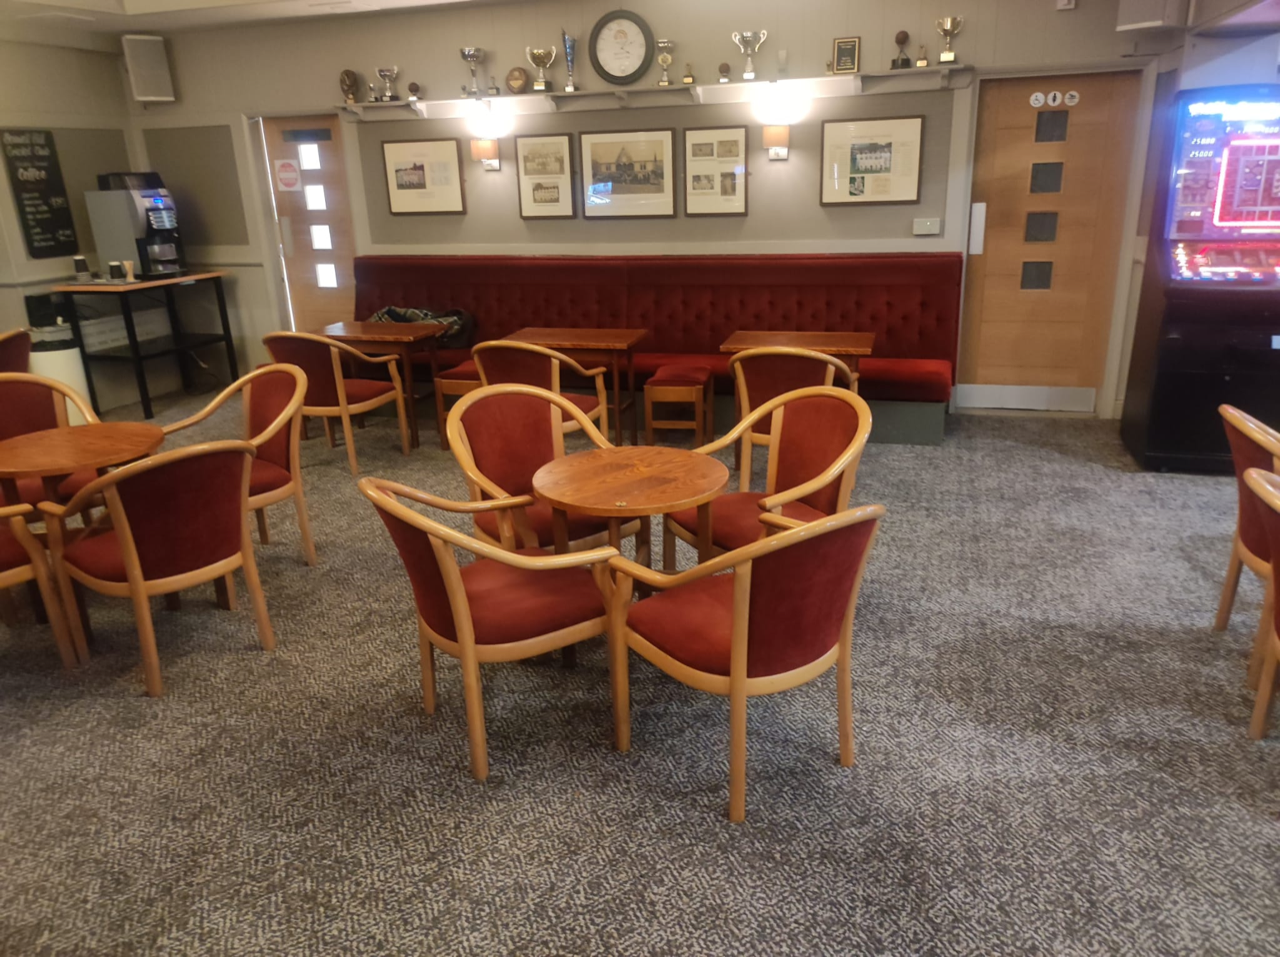 First photos of new carpet in Hill lounge